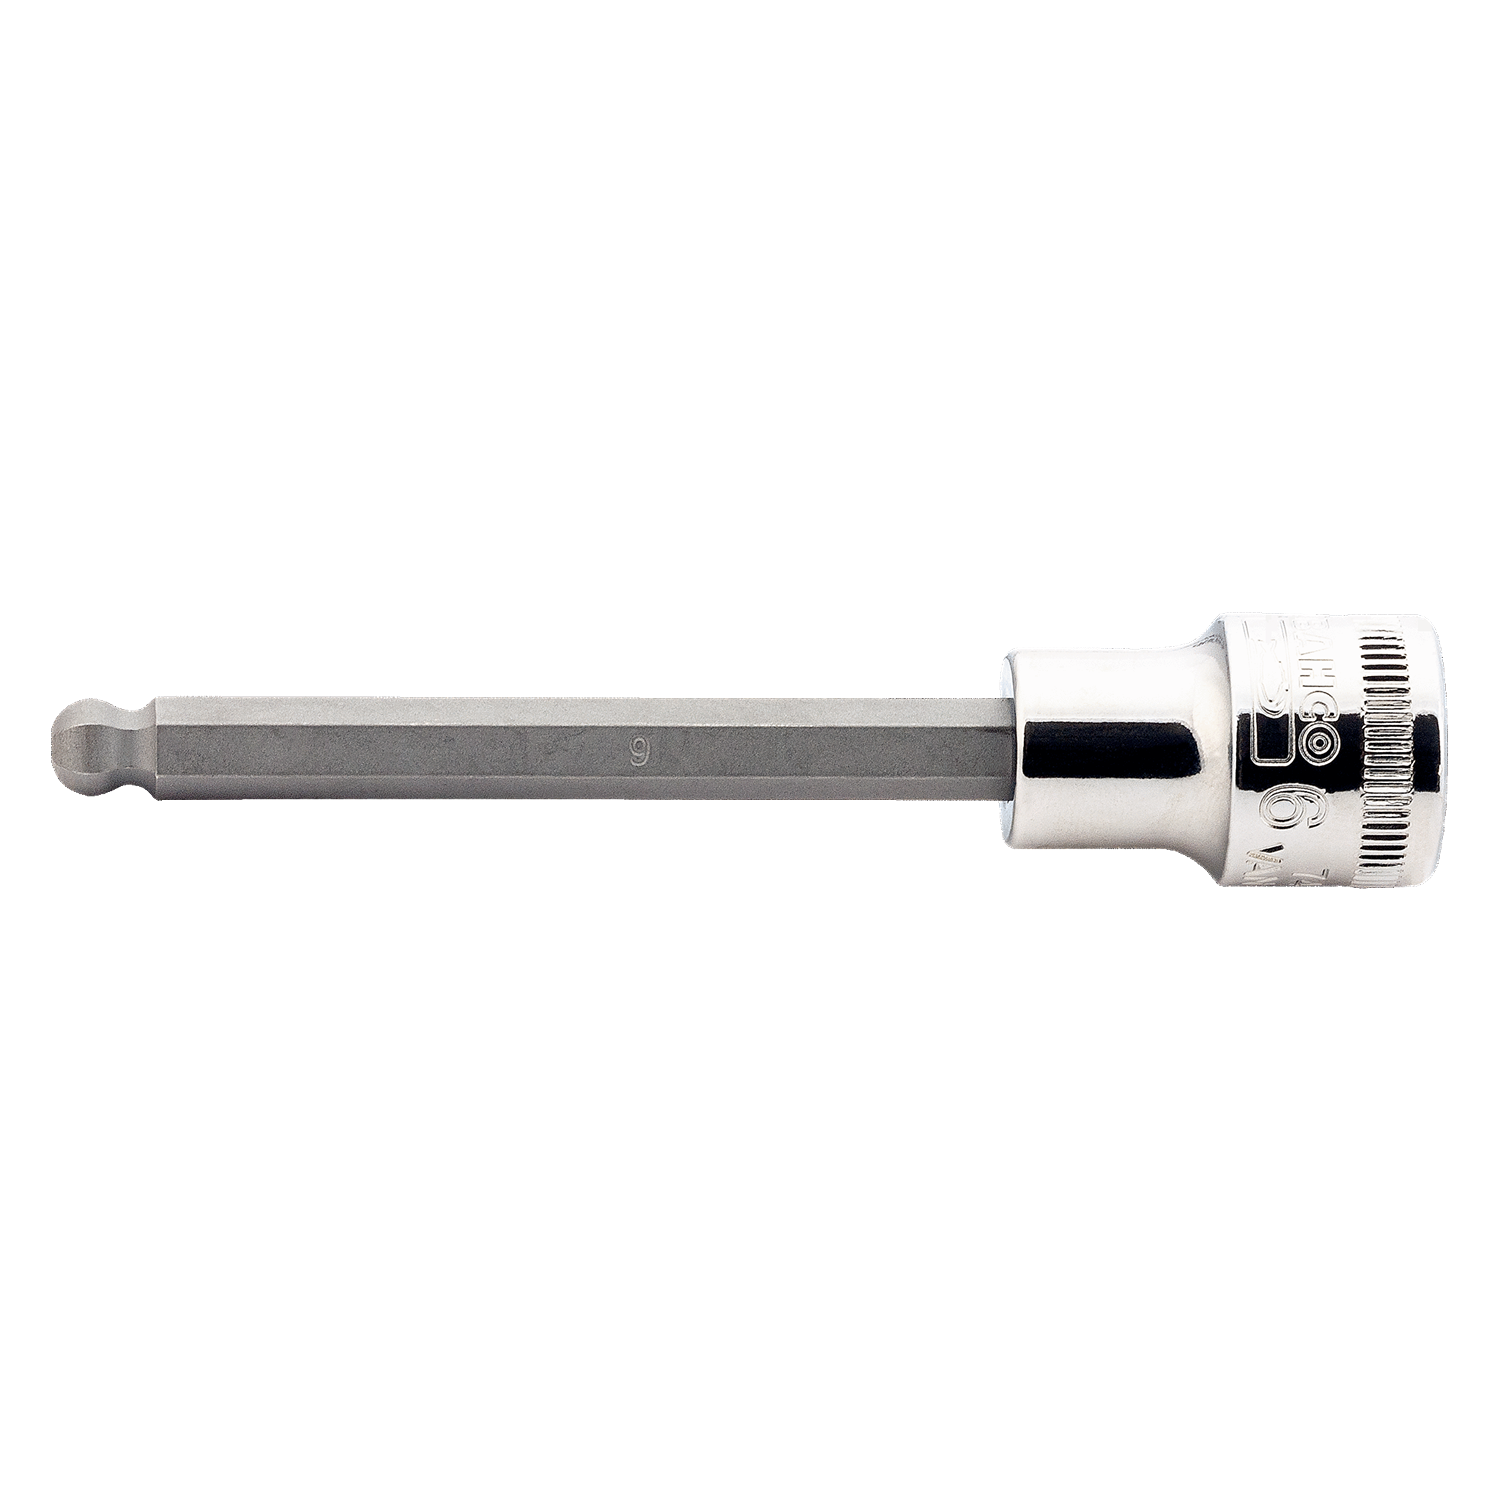 BAHCO 7409BH 3/8" Screwdriver Socket Square Ball Hex Head Screw - Premium Screwdriver Socket from BAHCO - Shop now at Yew Aik.